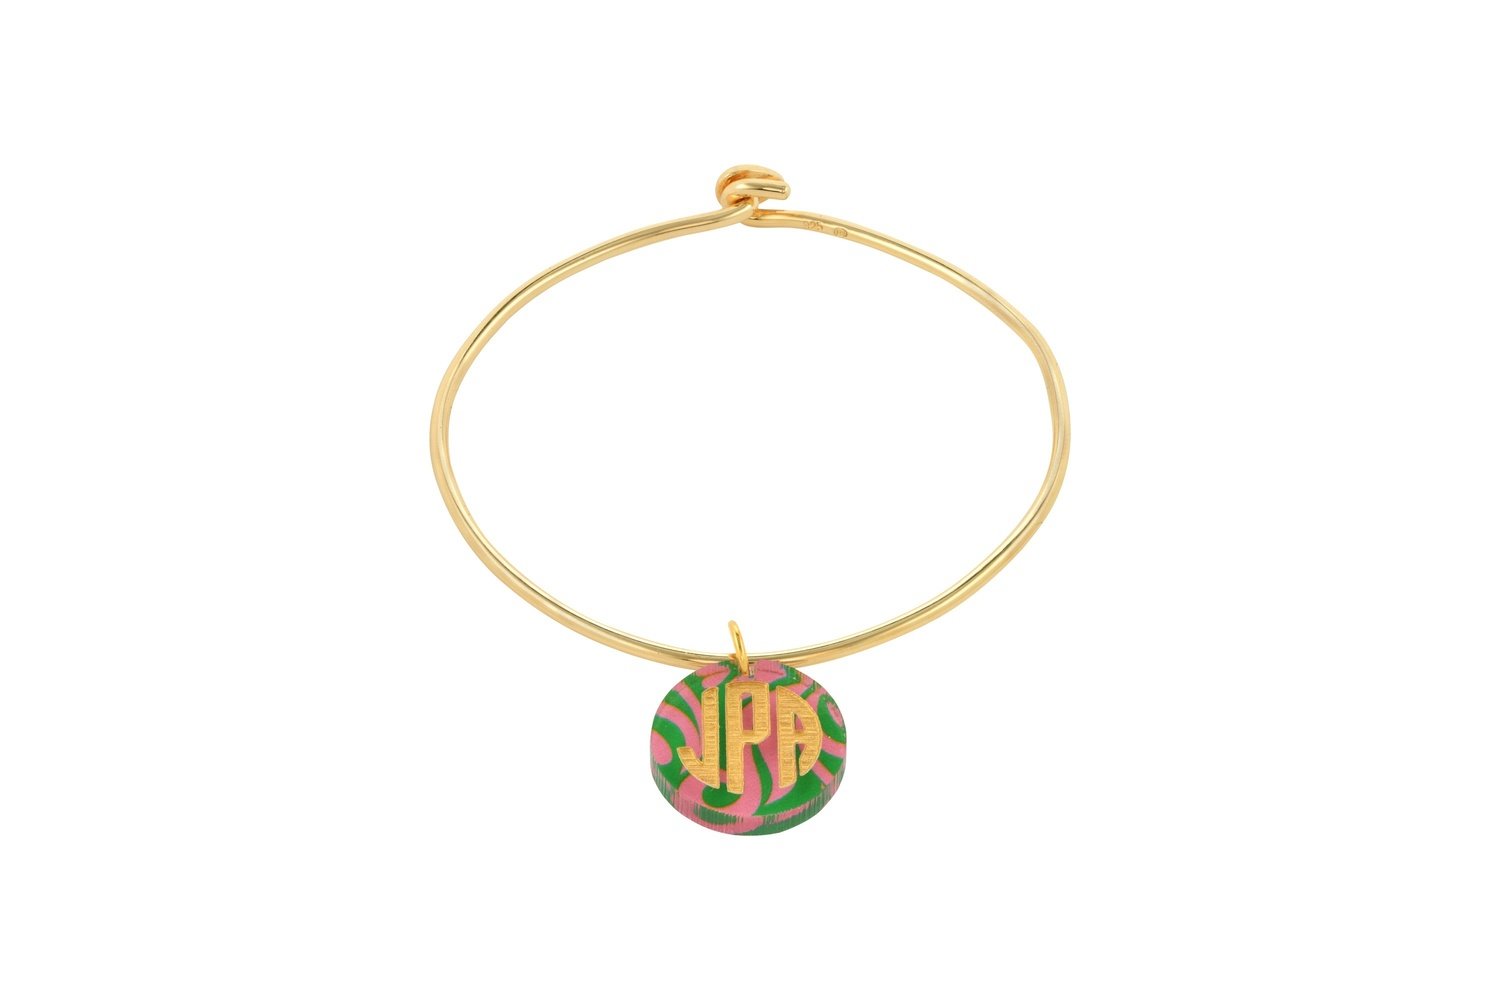 Traditional Monogram Charm with Sterling Silver Bangle Bracelet with Yellow Gold Plating